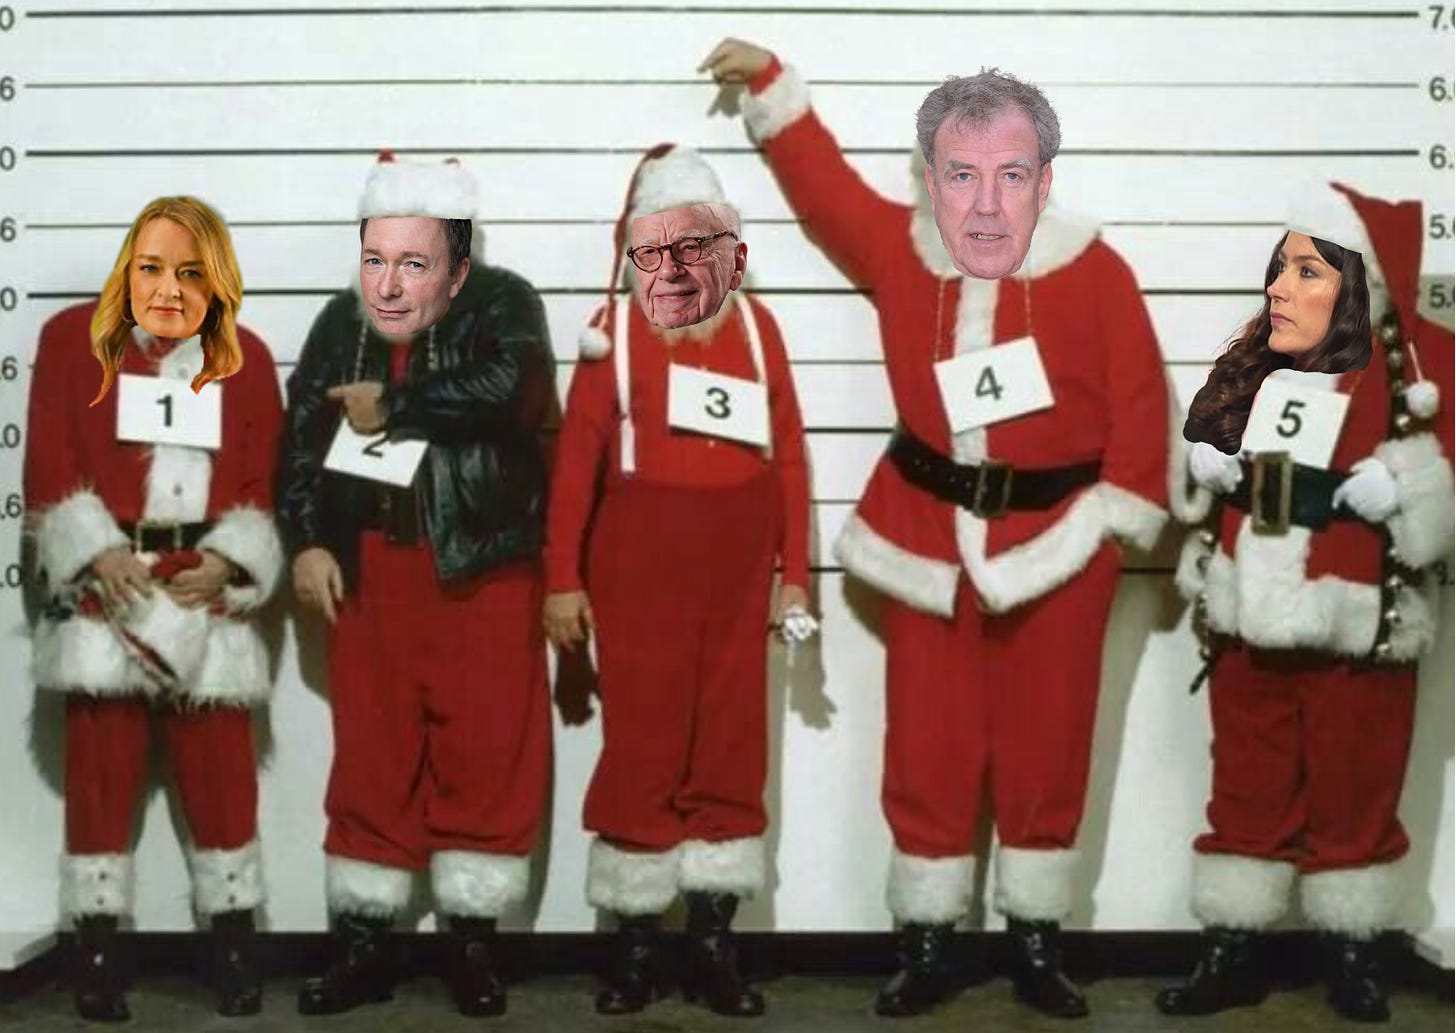 A police lineup of Santas, they are Laura Kuenssberg, tony Parsons, Rupert Mudoch, Jeremy Clarkson and Victoria Newton